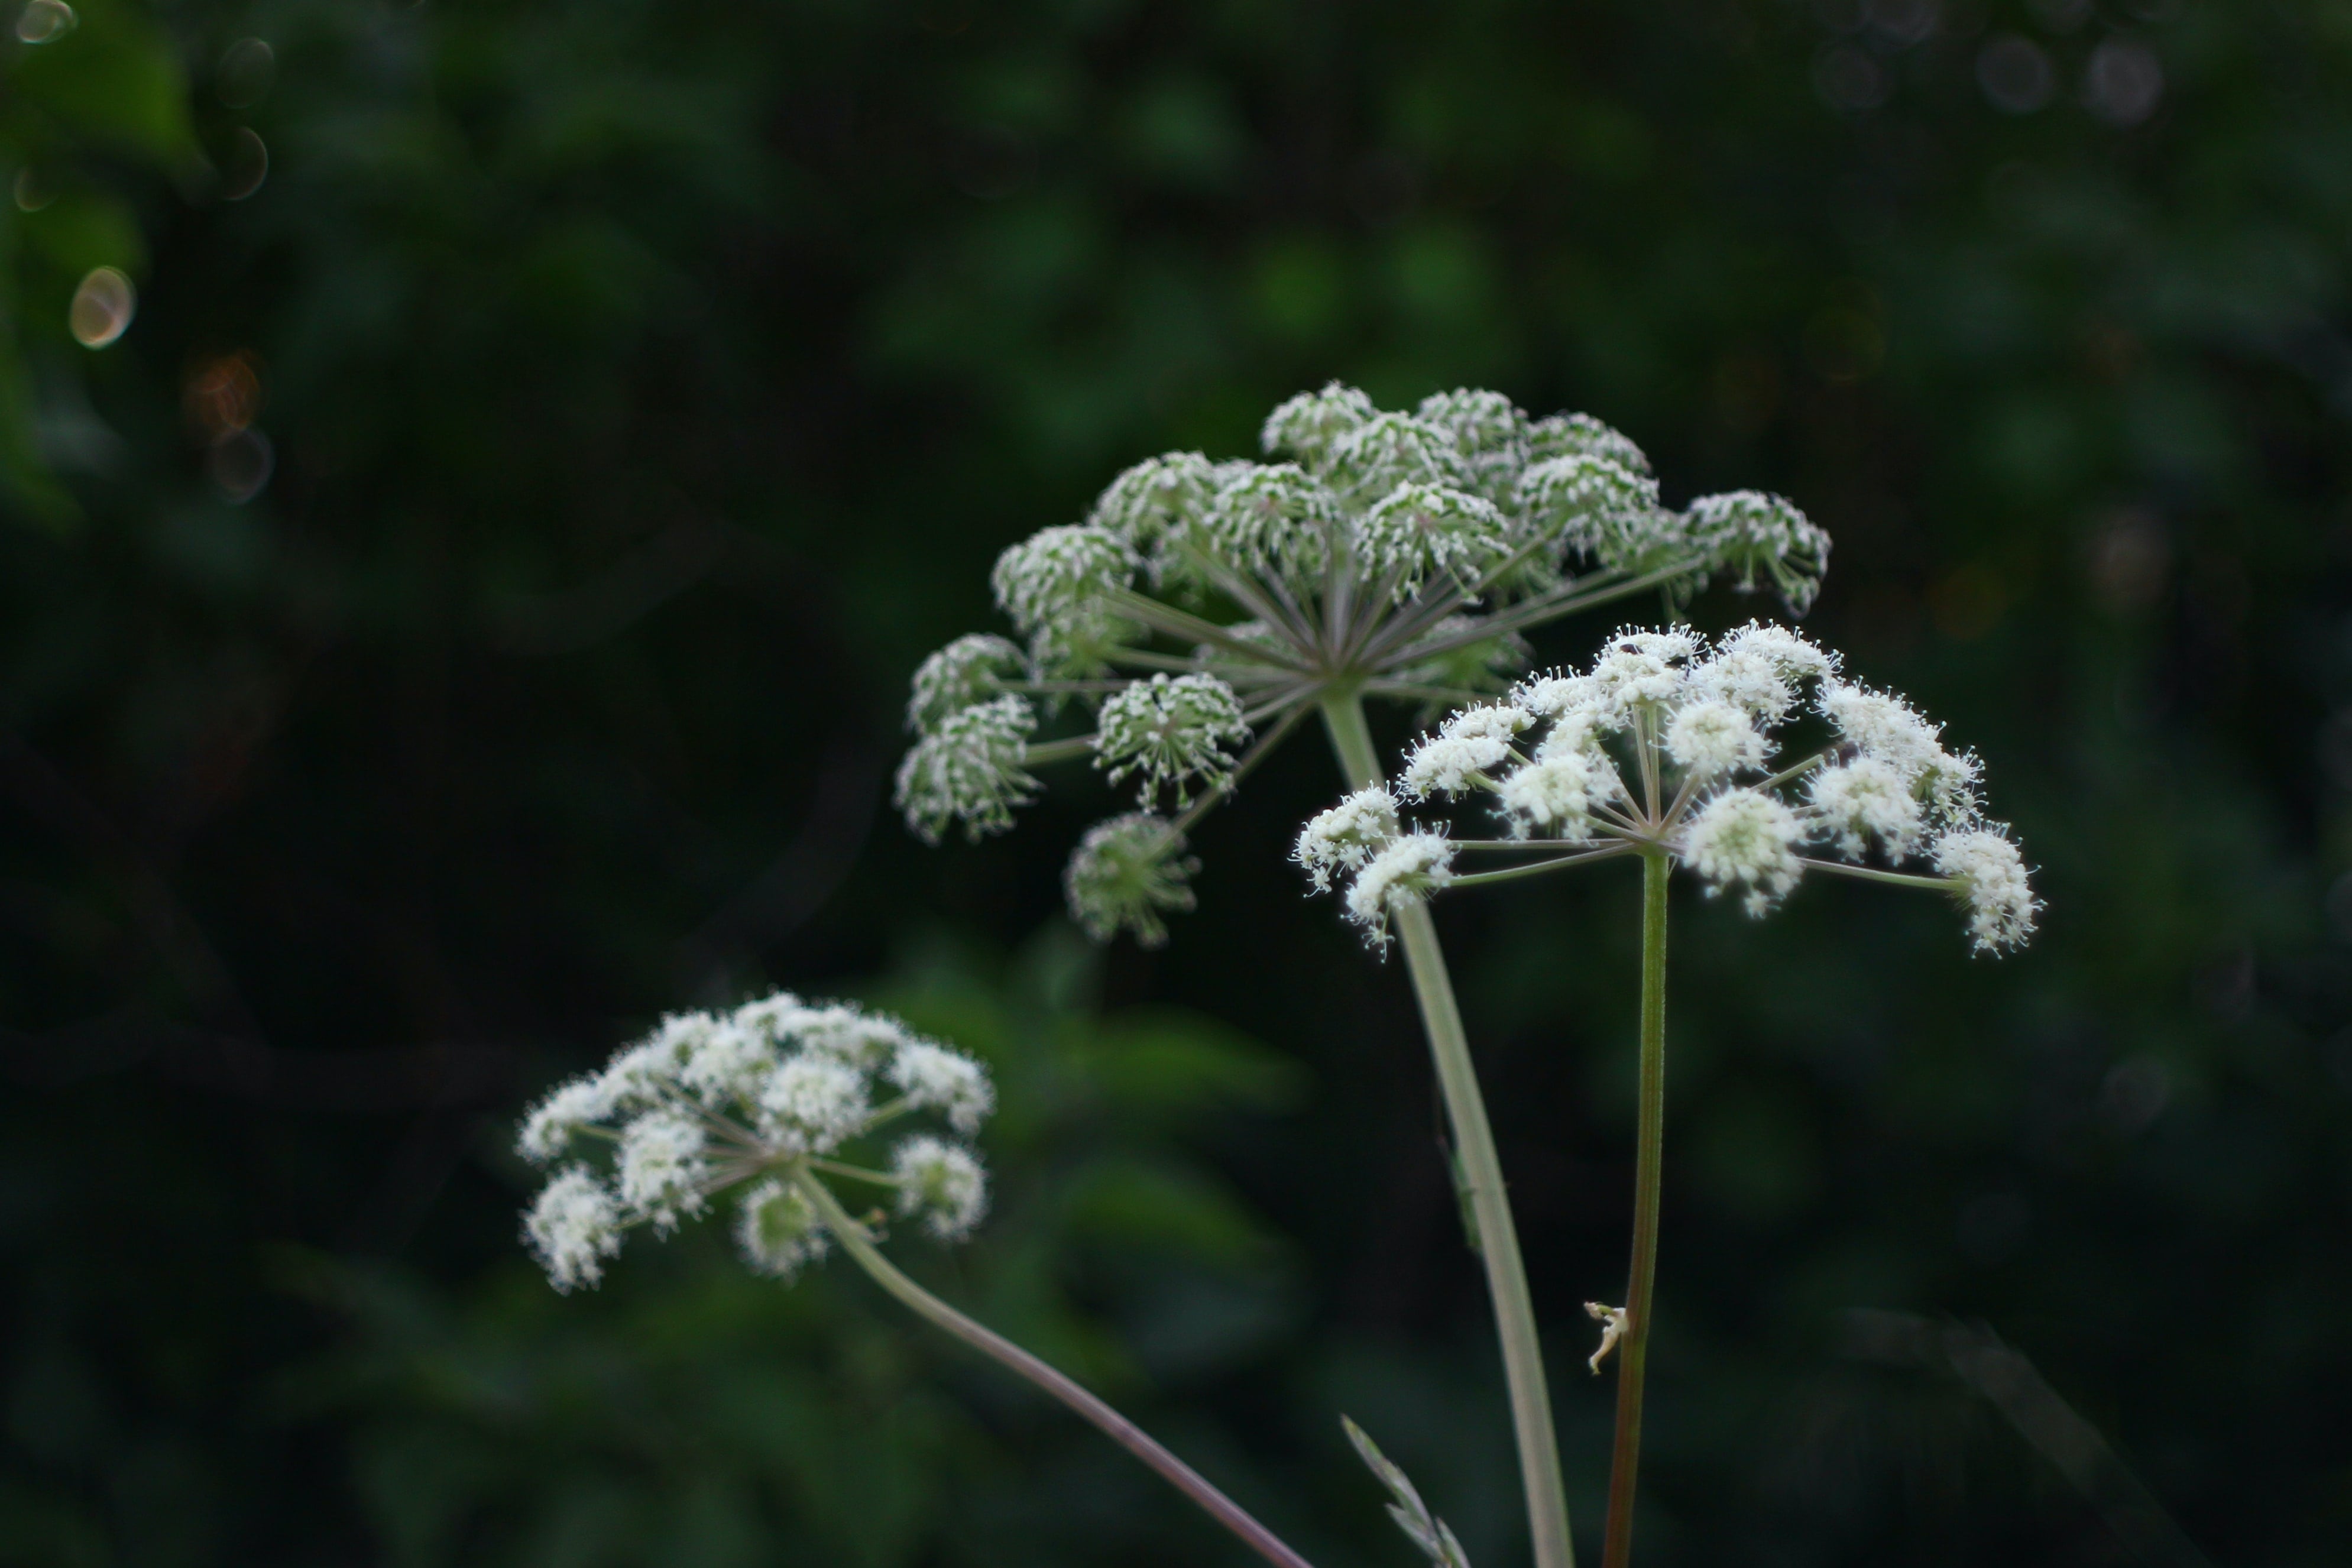 Giant hogweed, which is an invasive species